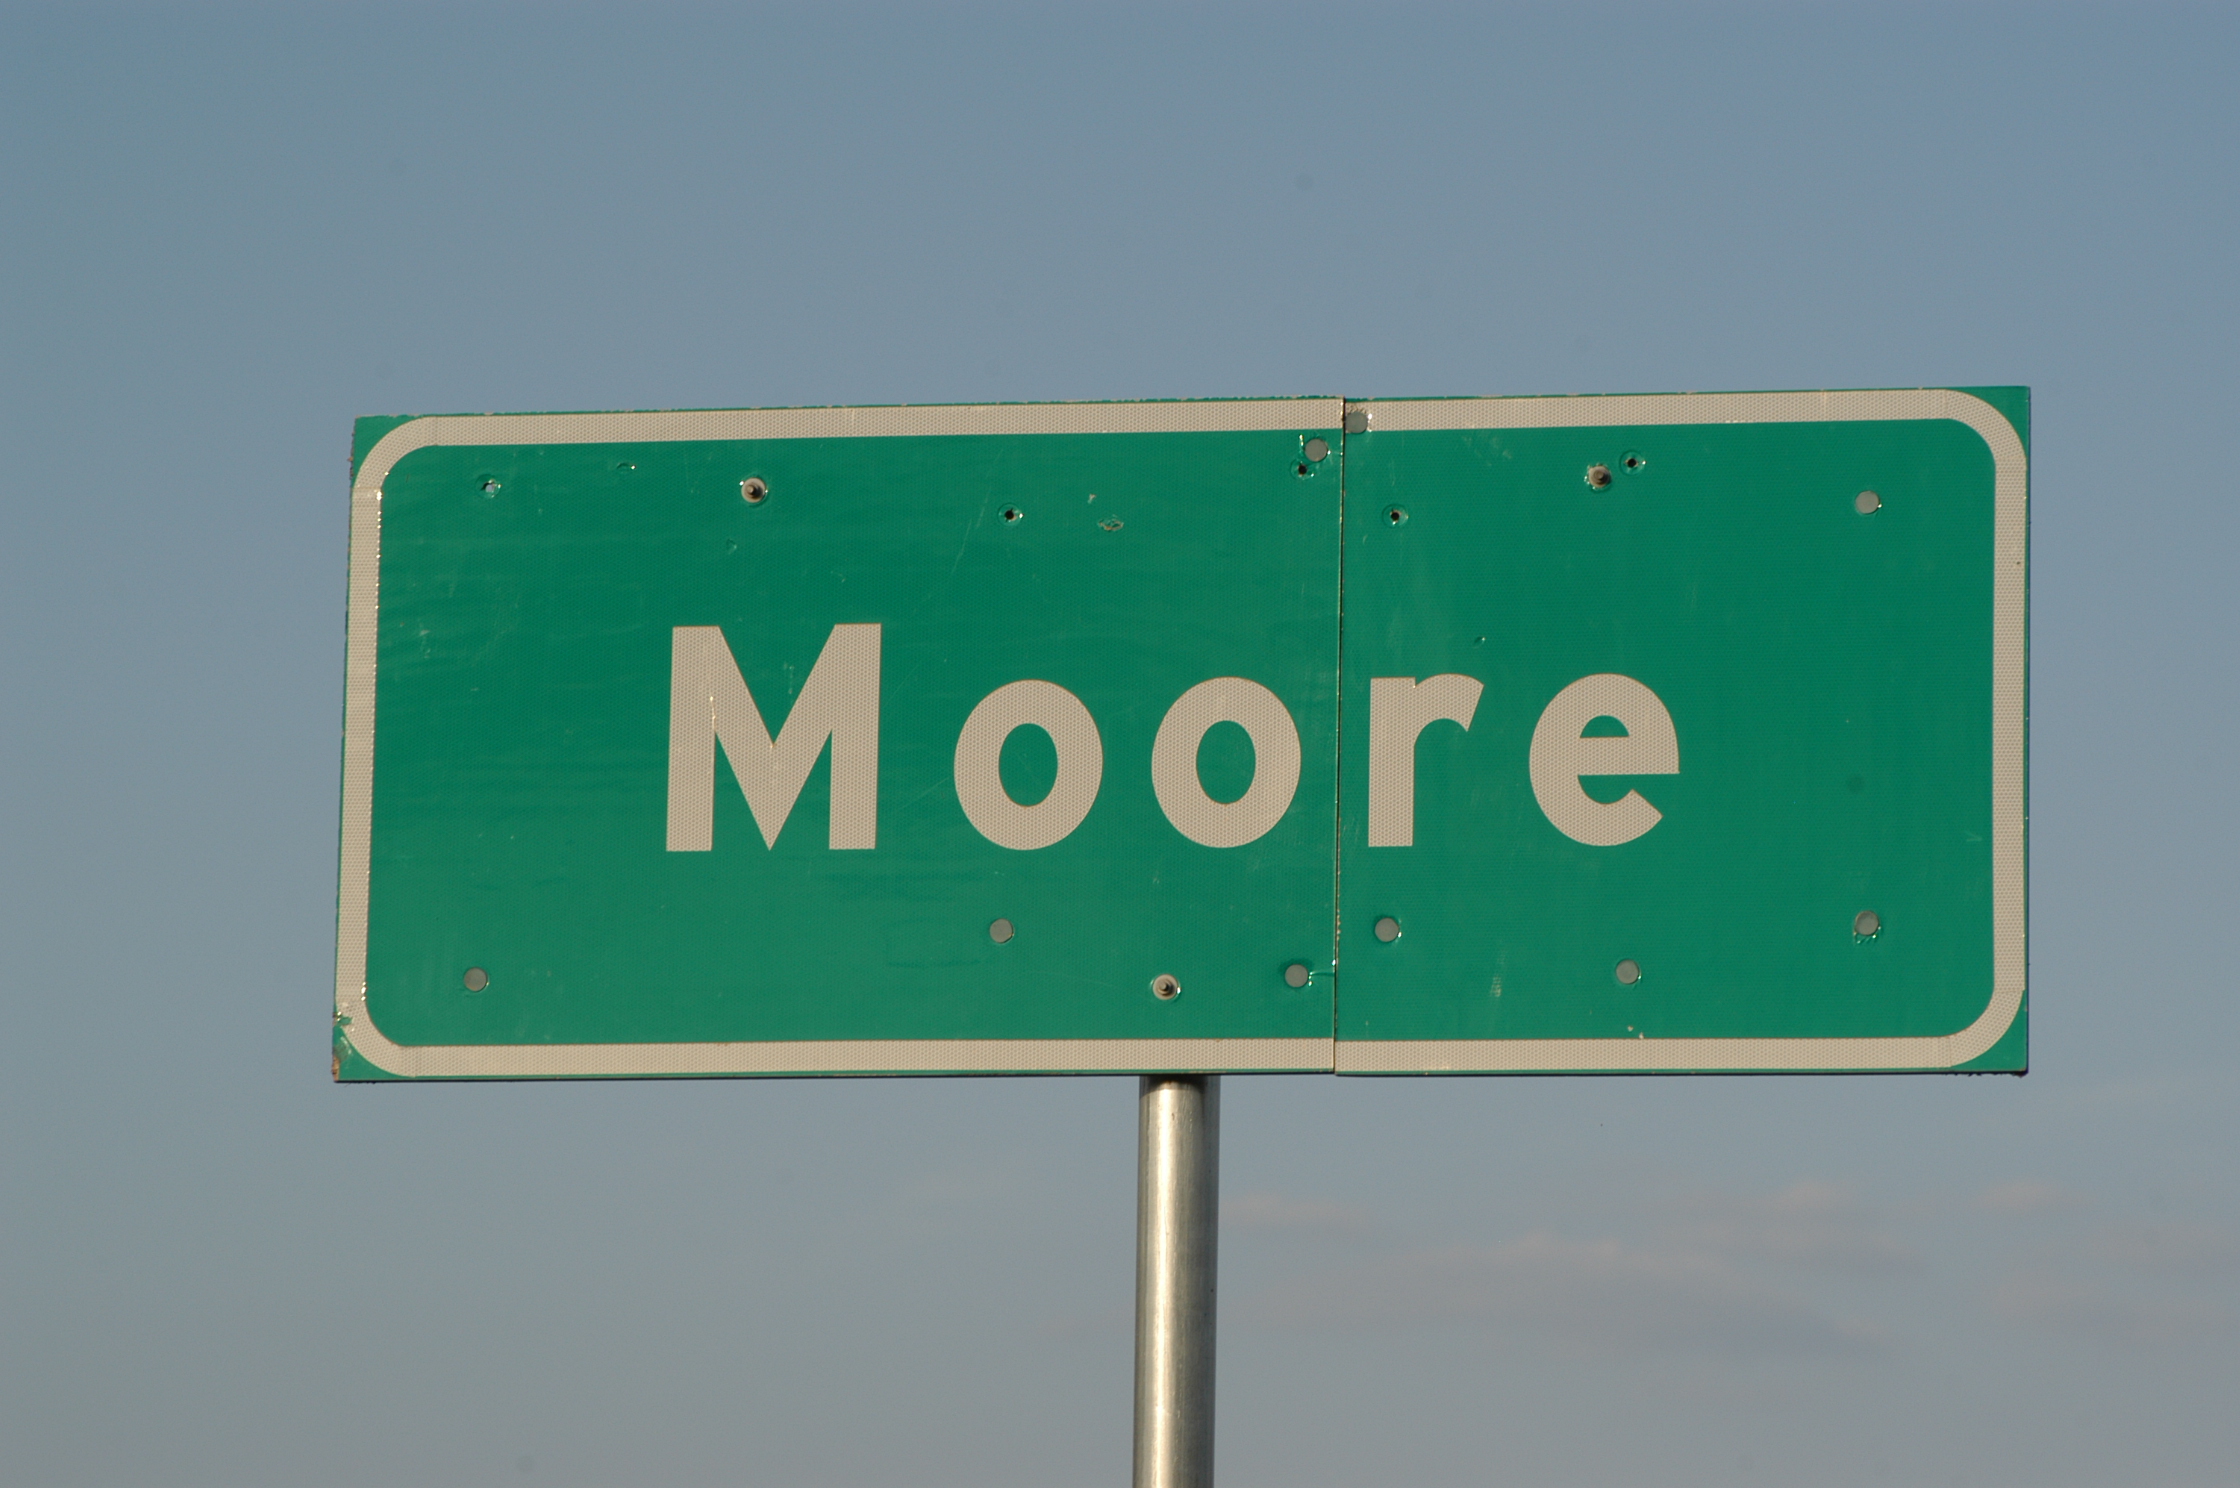 City of Moore road sign